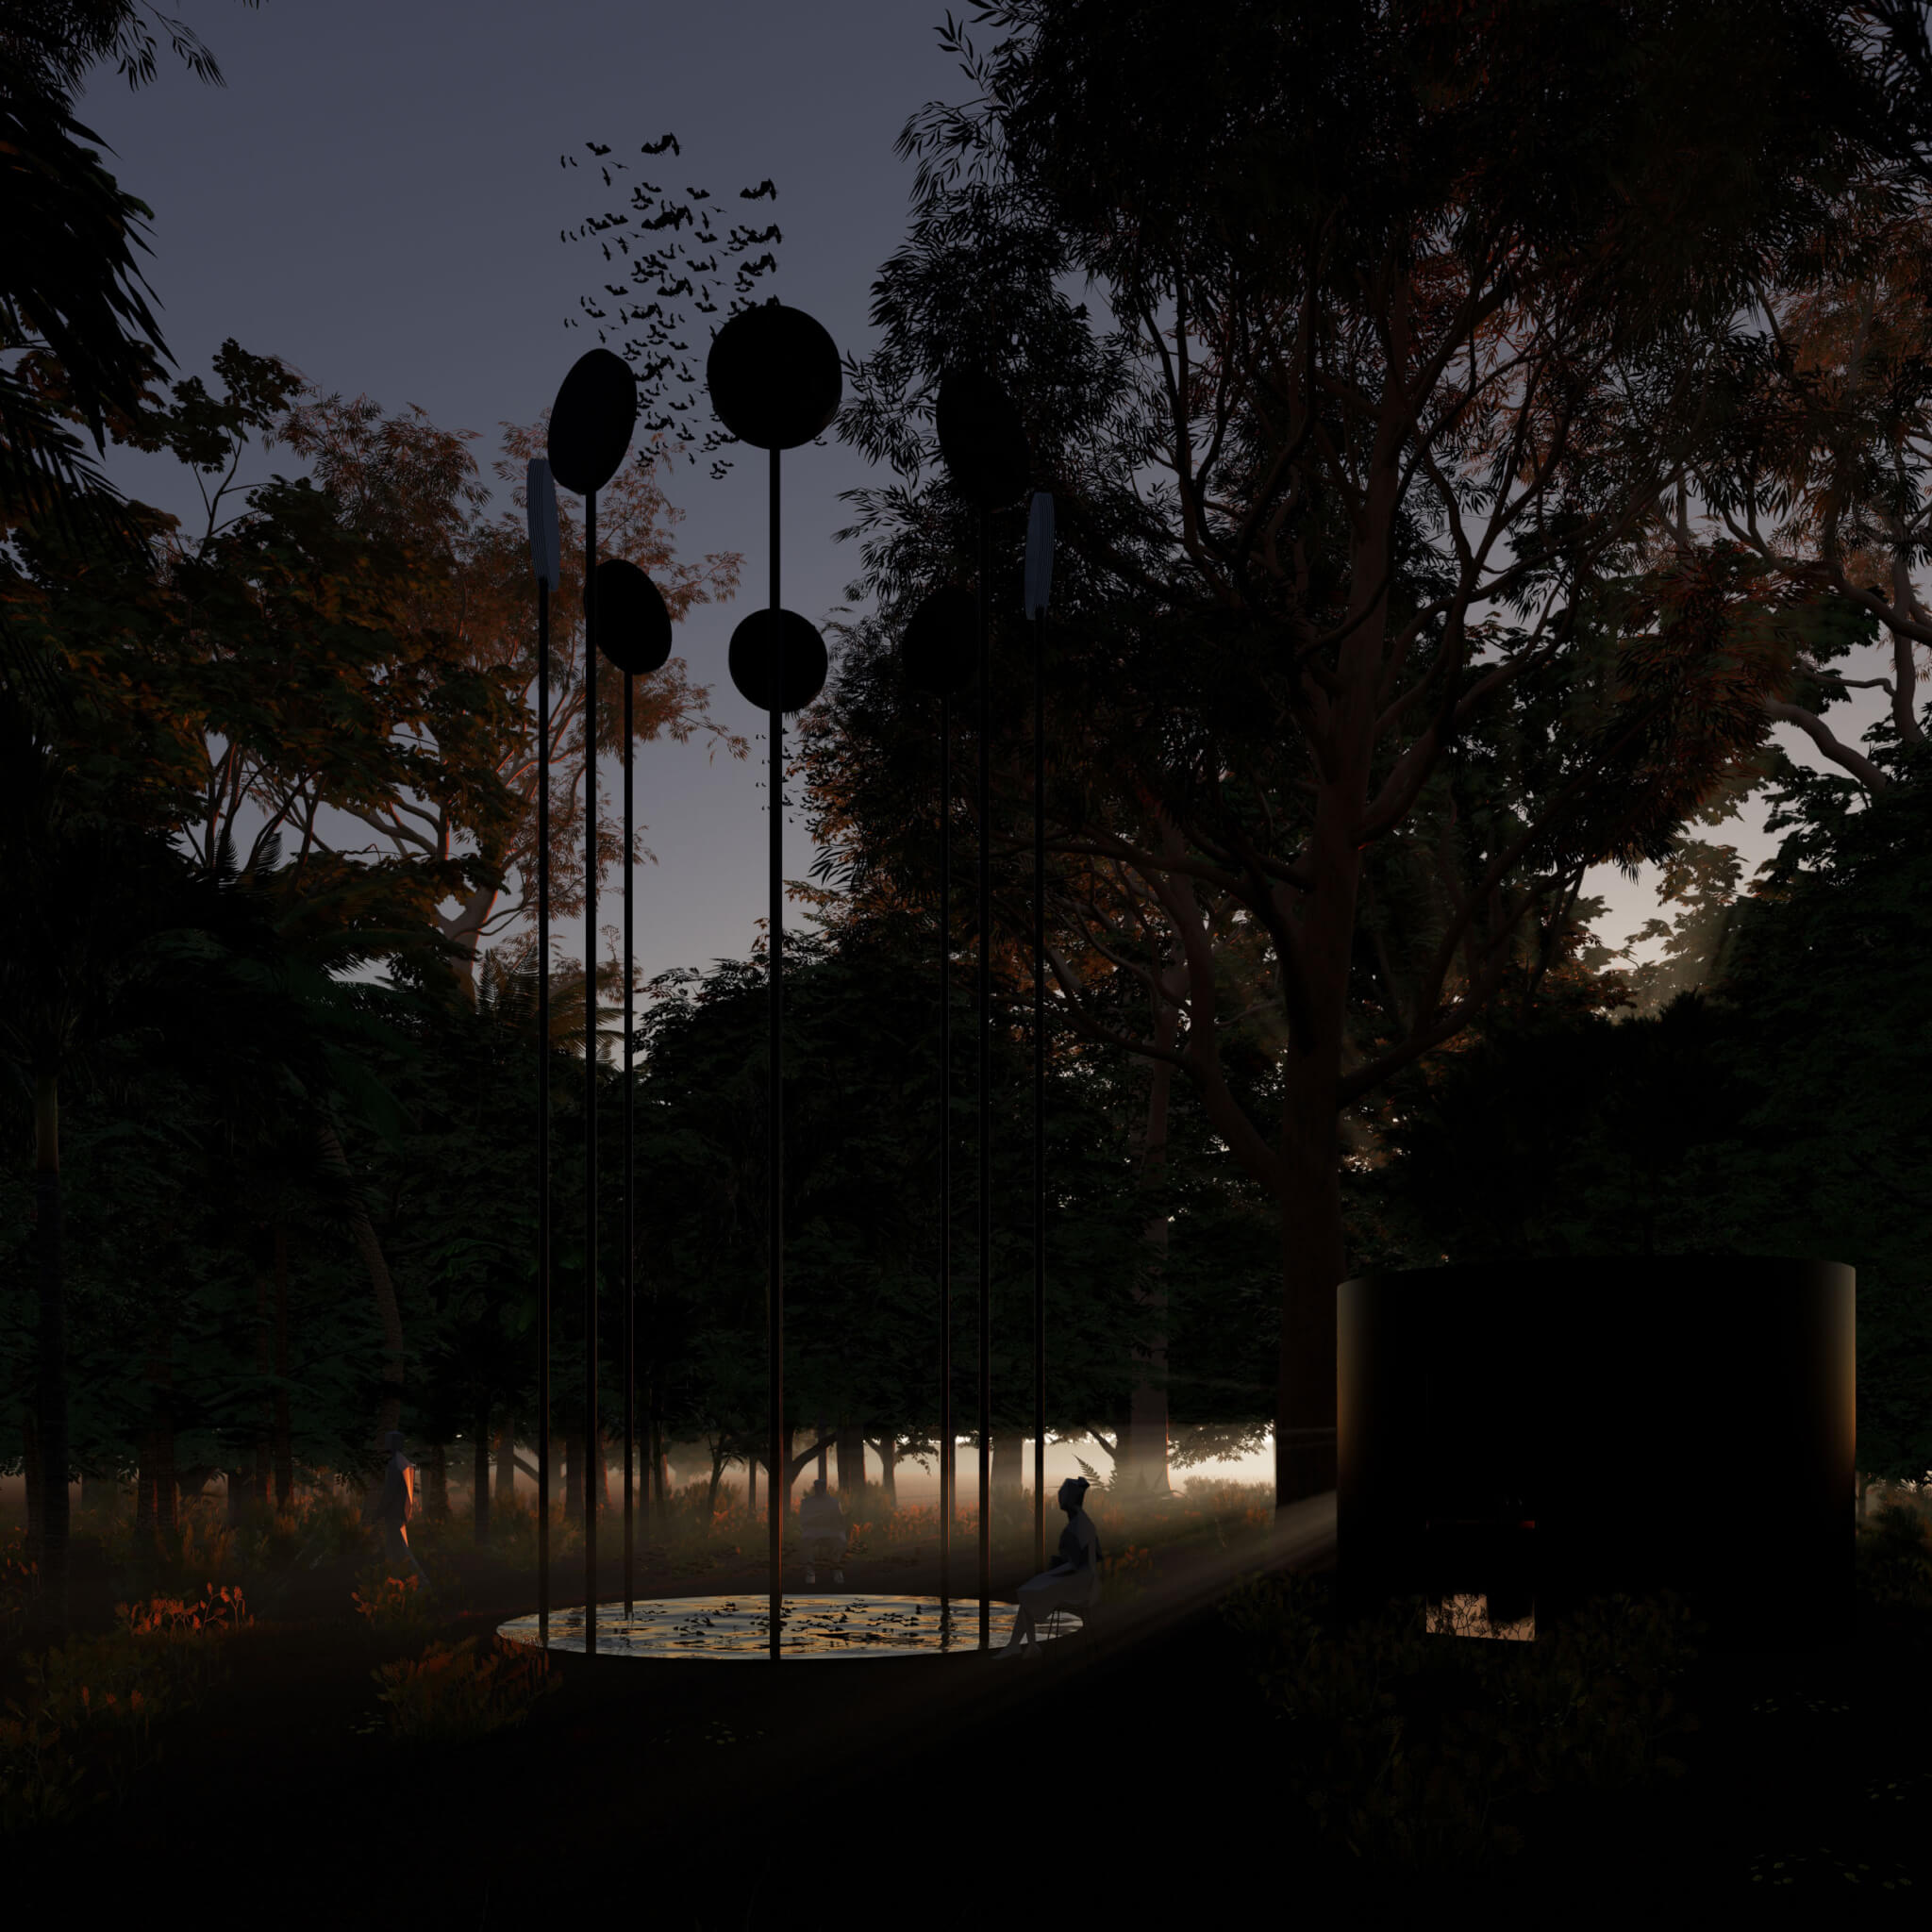 Tall posts with circular object on the top standing in a jungle at night As bats fly near the structure.